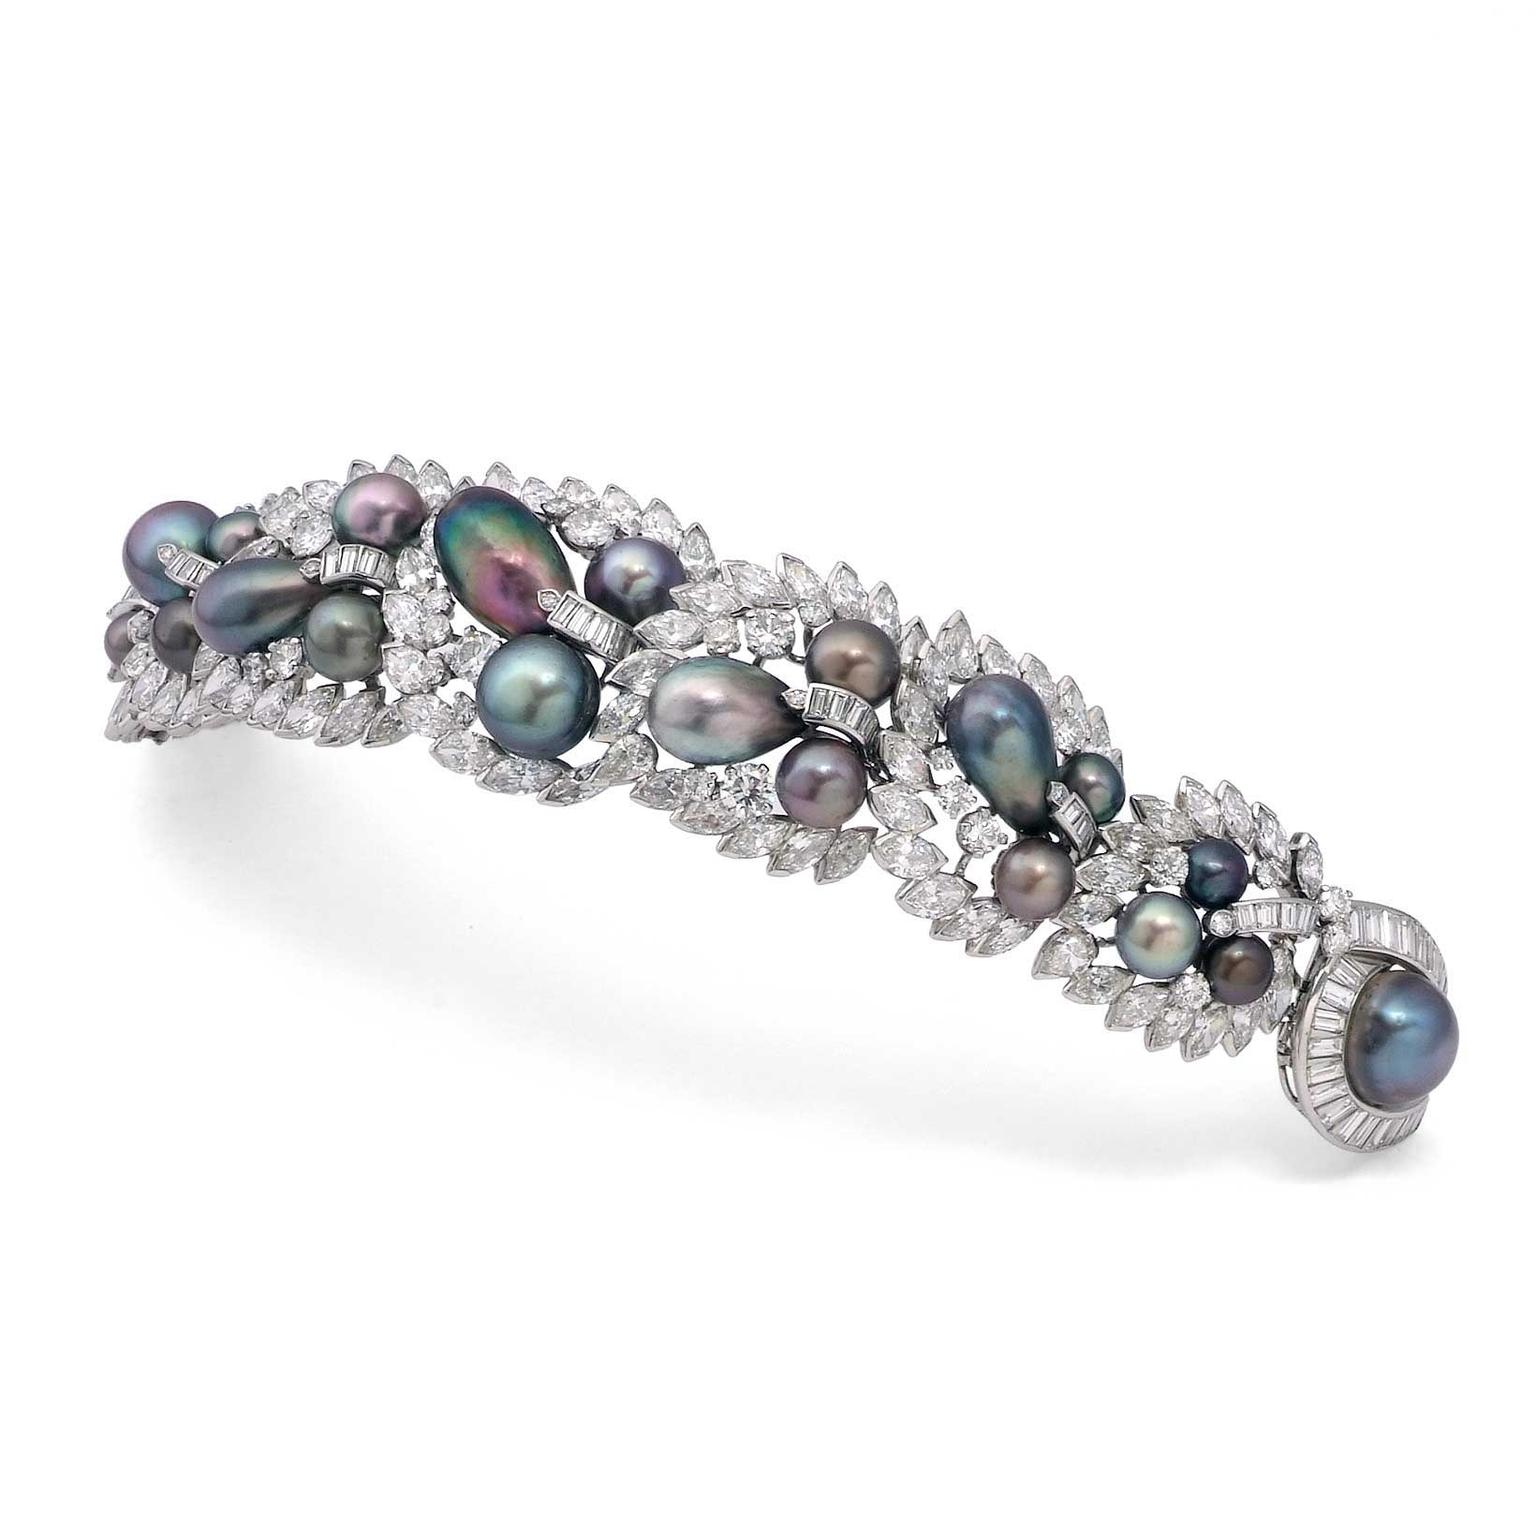 Symbolic and Chase Cartier coloured pearl and diamond bracelet